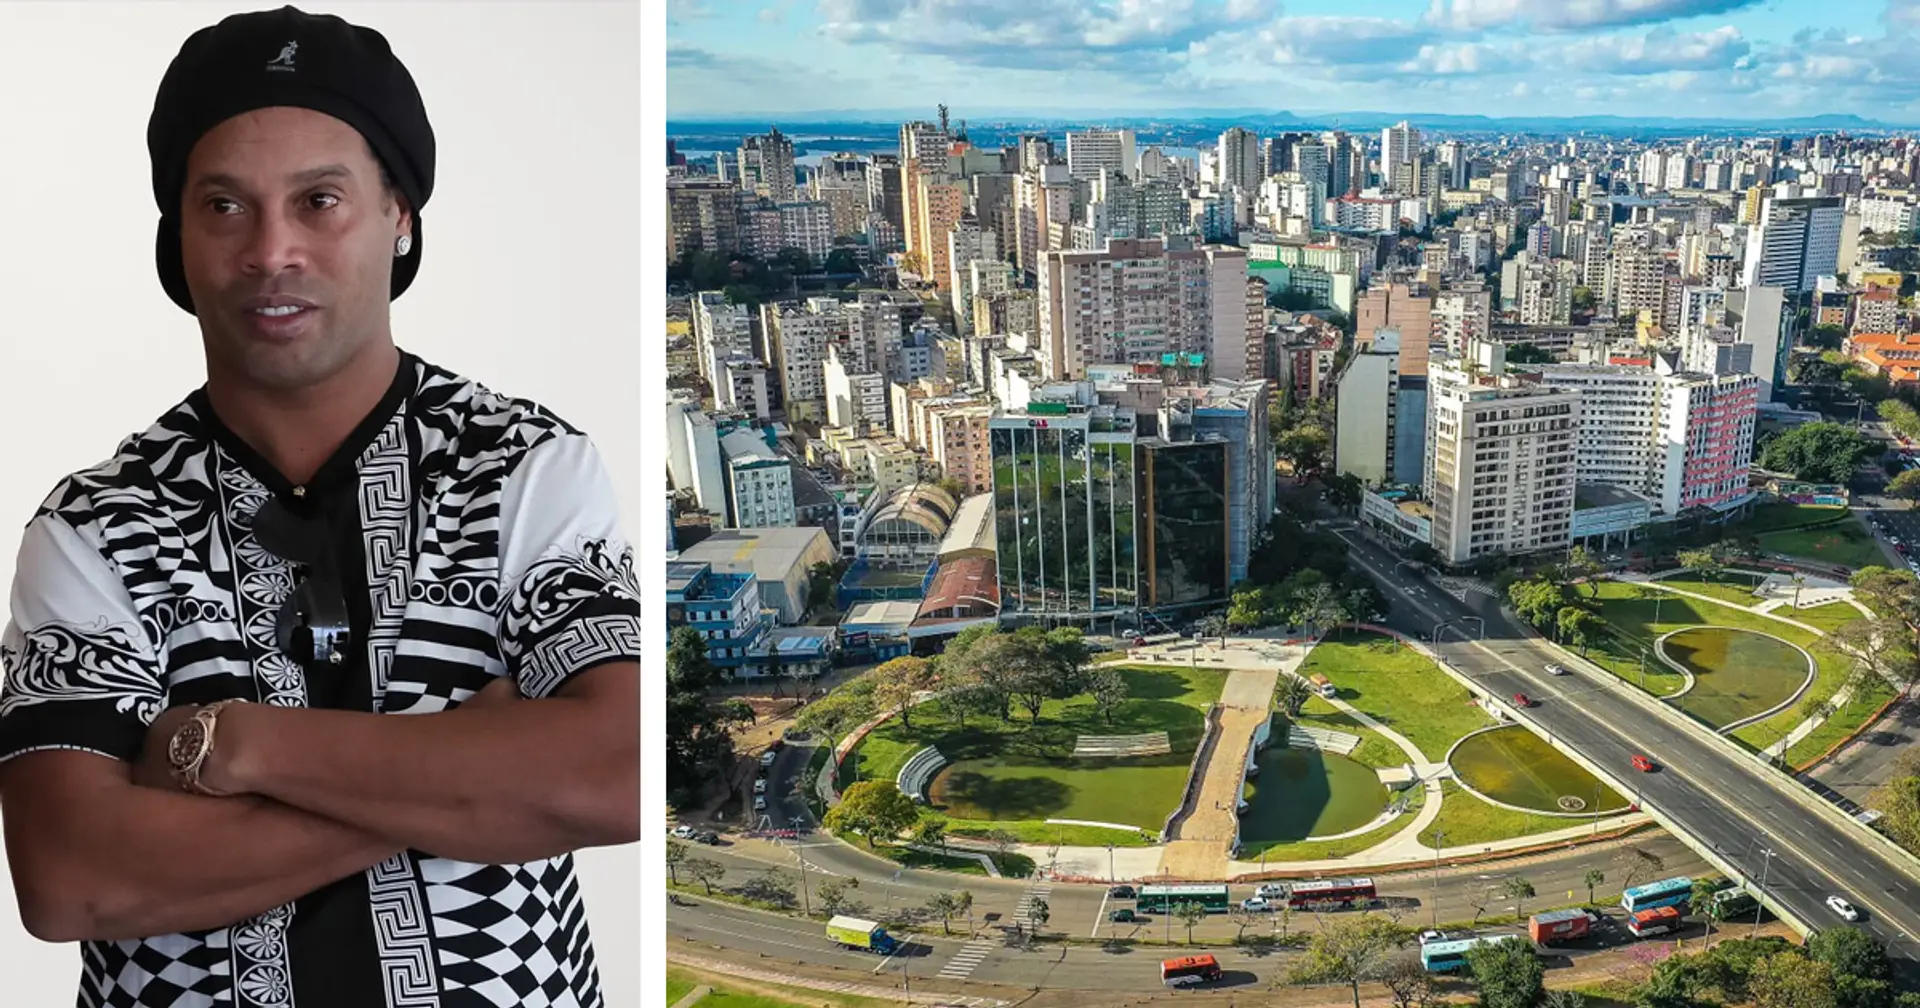 Ronaldinho was born in a truly wonderful place Porto Alegre – we'll tell you more about that